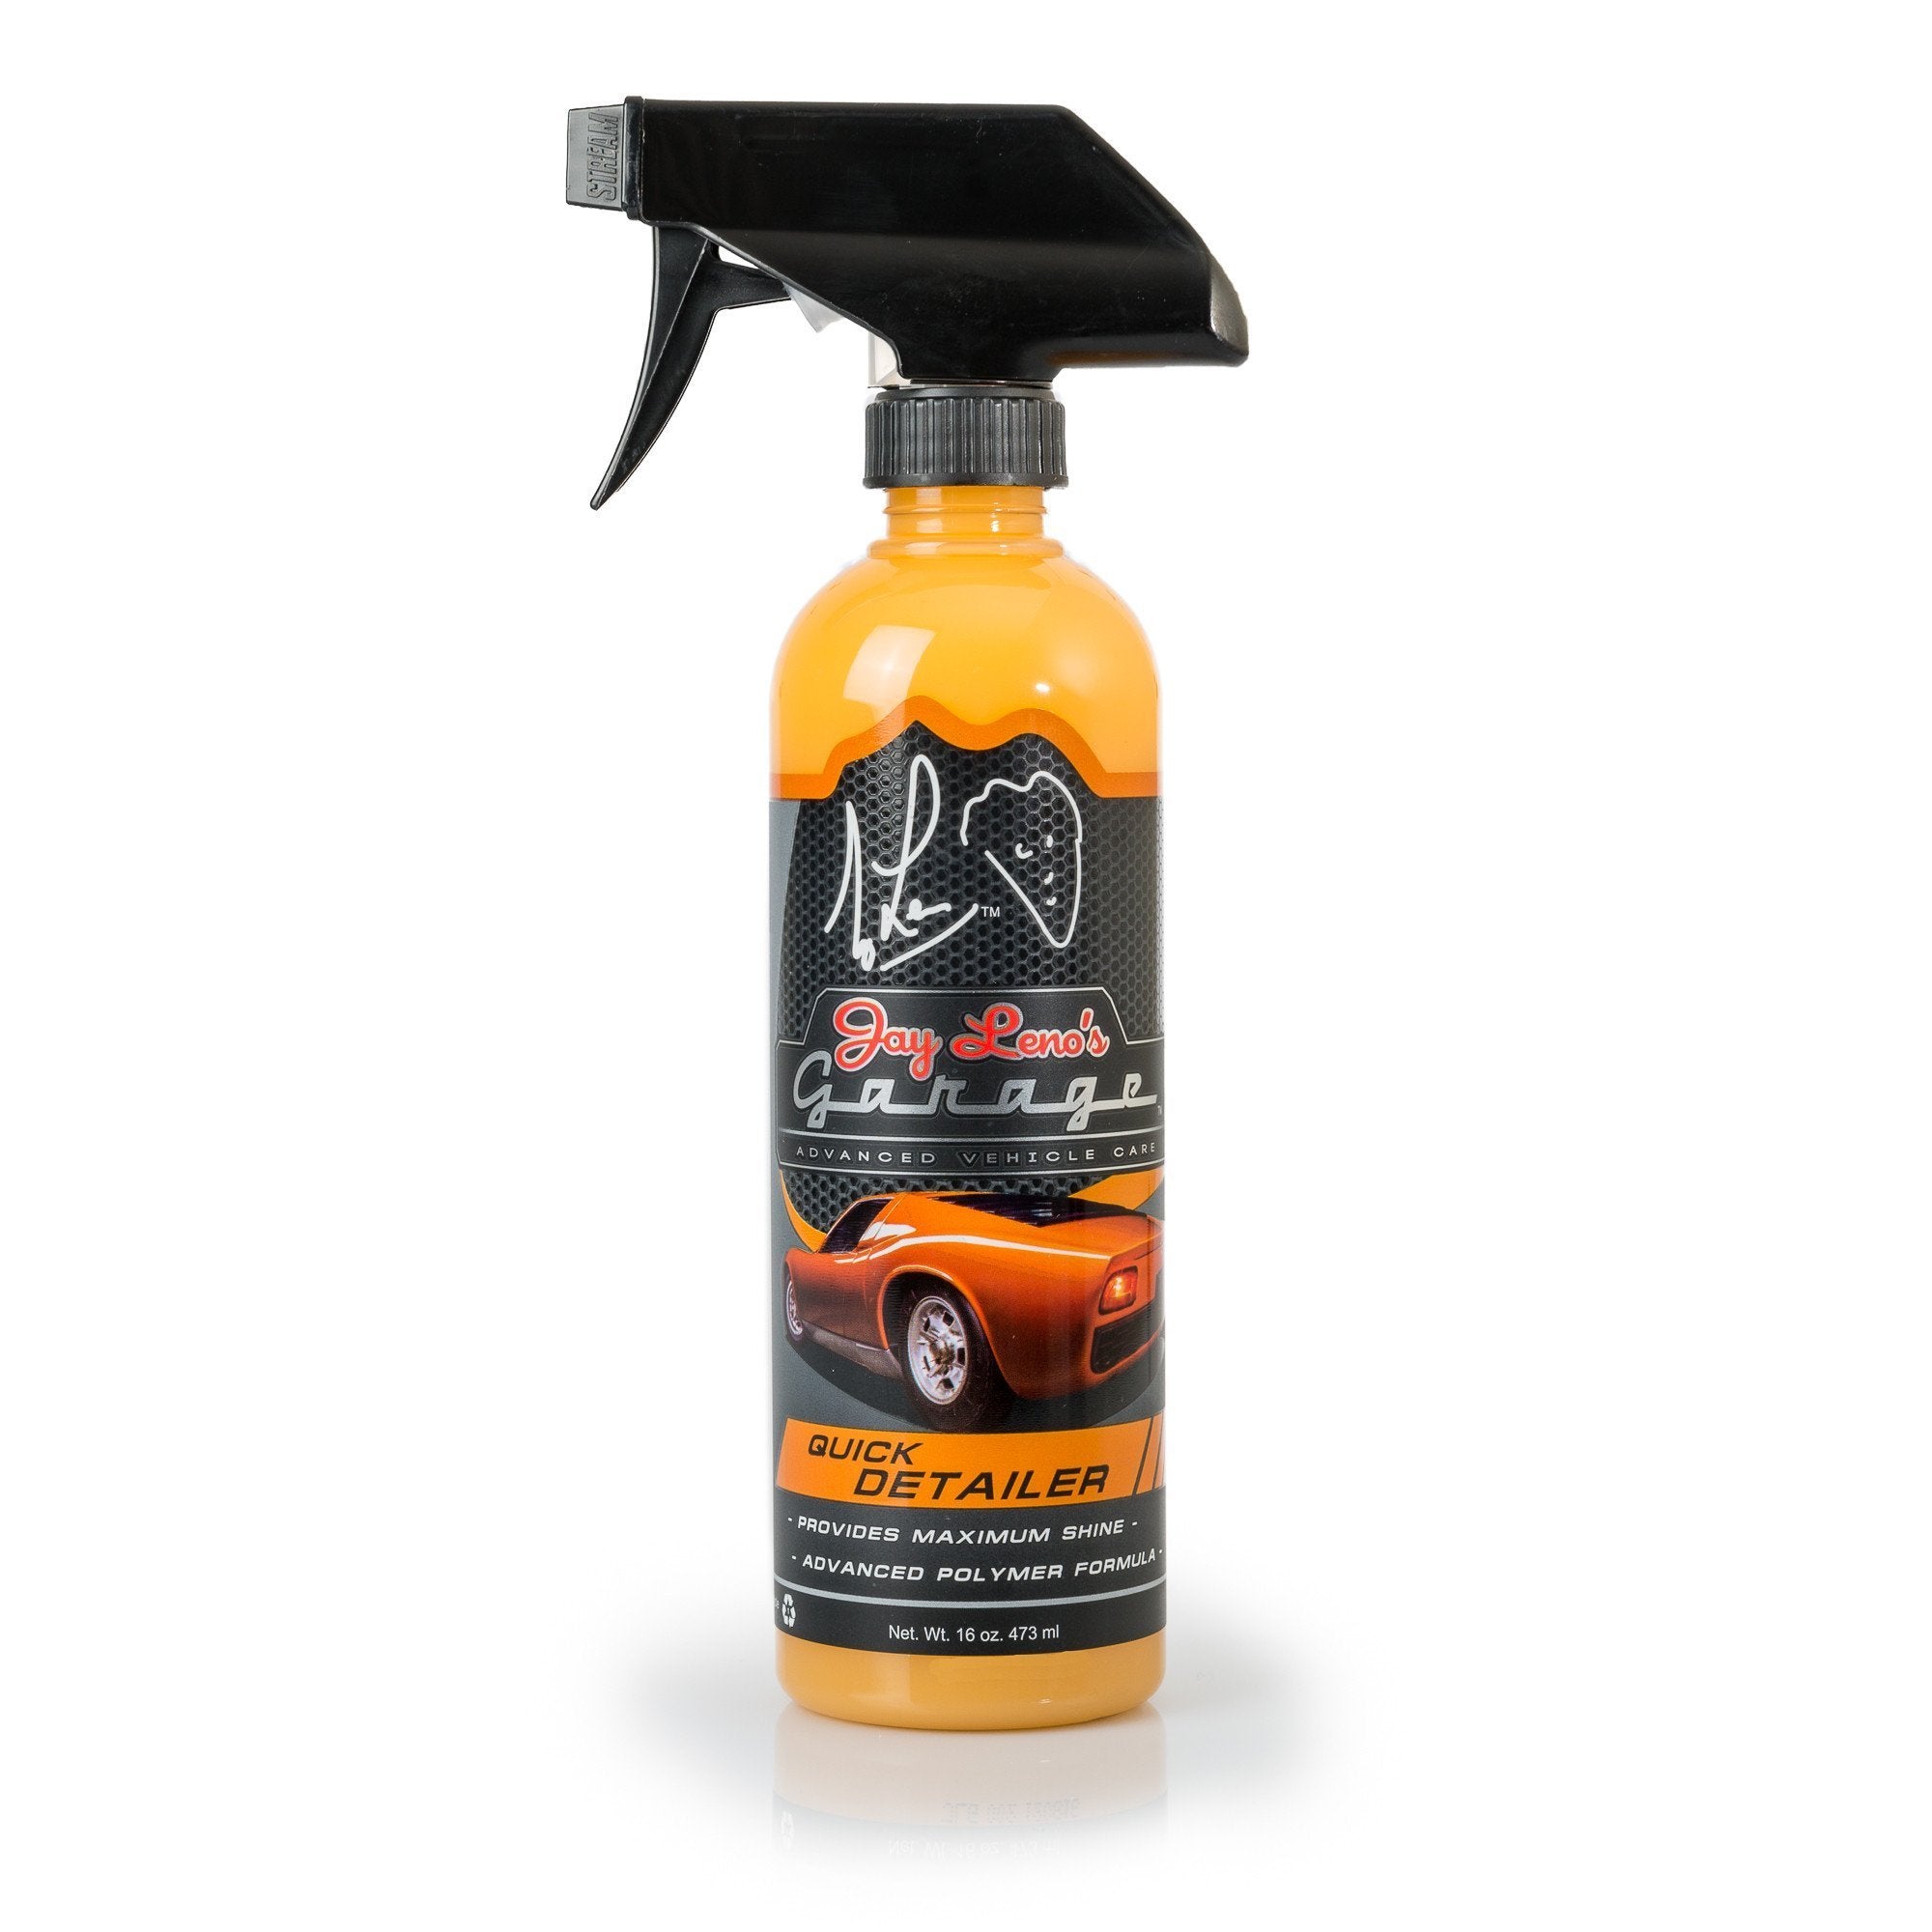 Shiny Garage - Car Care & Detailing Products